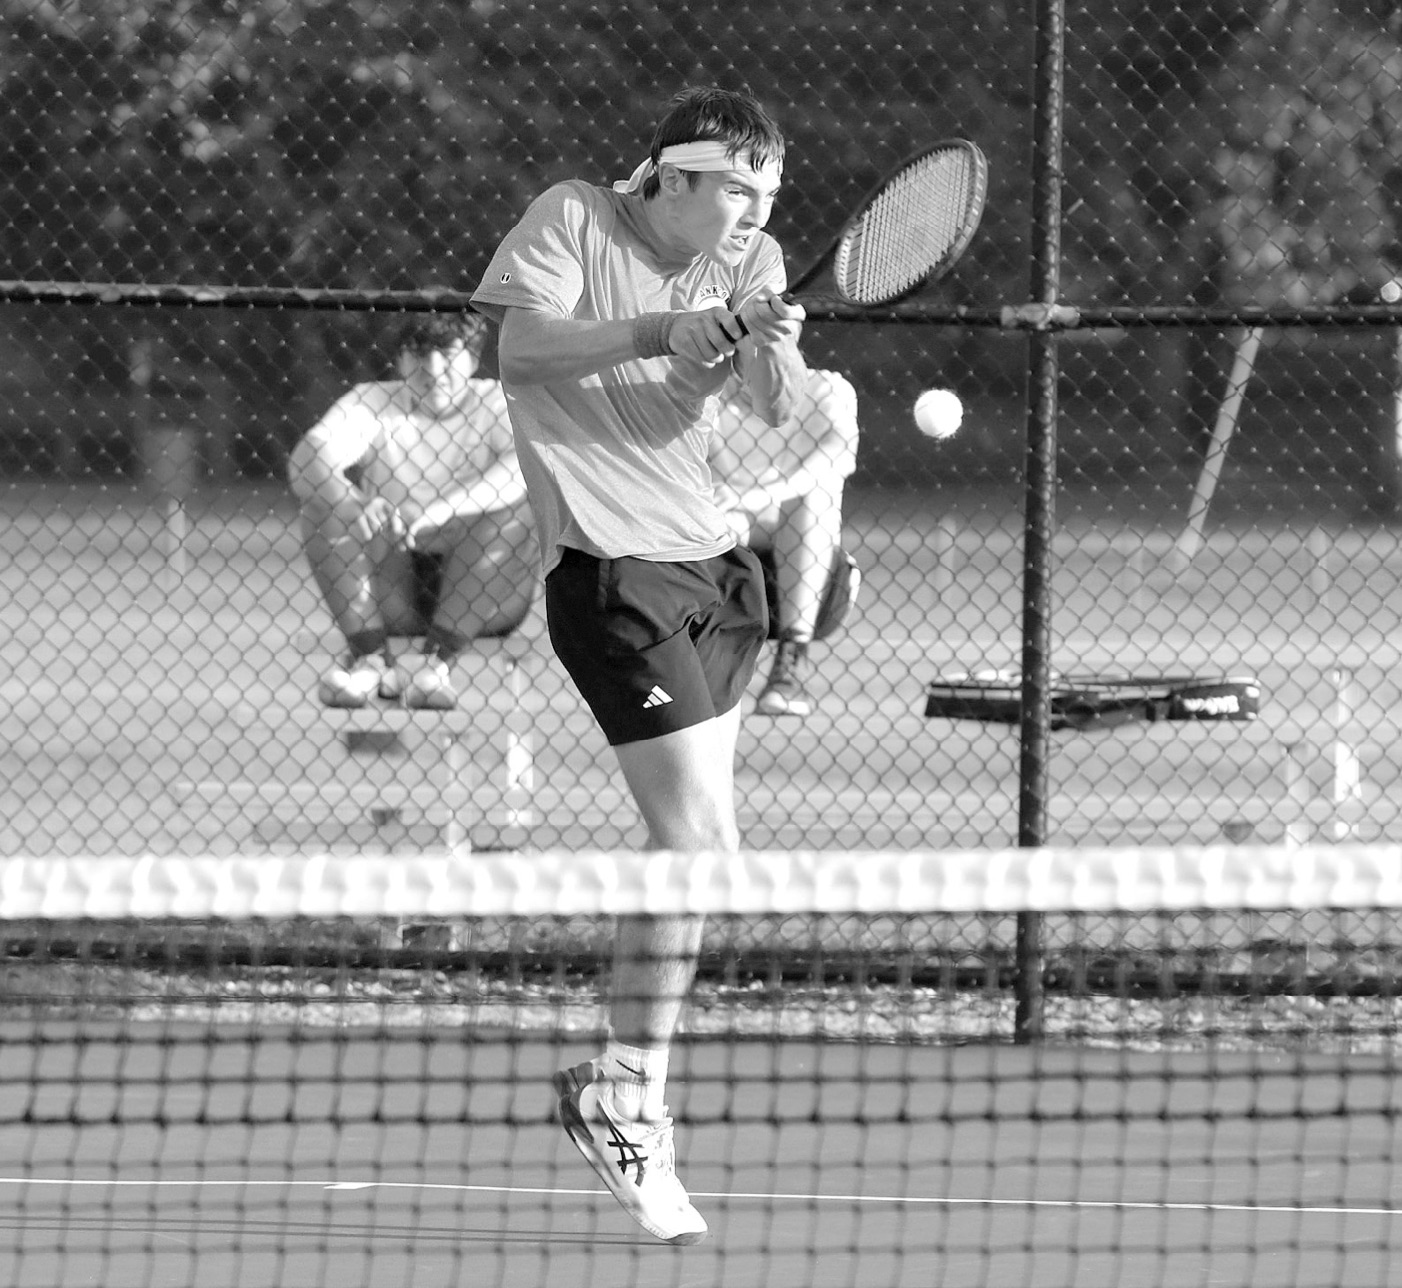 Frankton’s Sam Barr competes in the No. 1 singles match